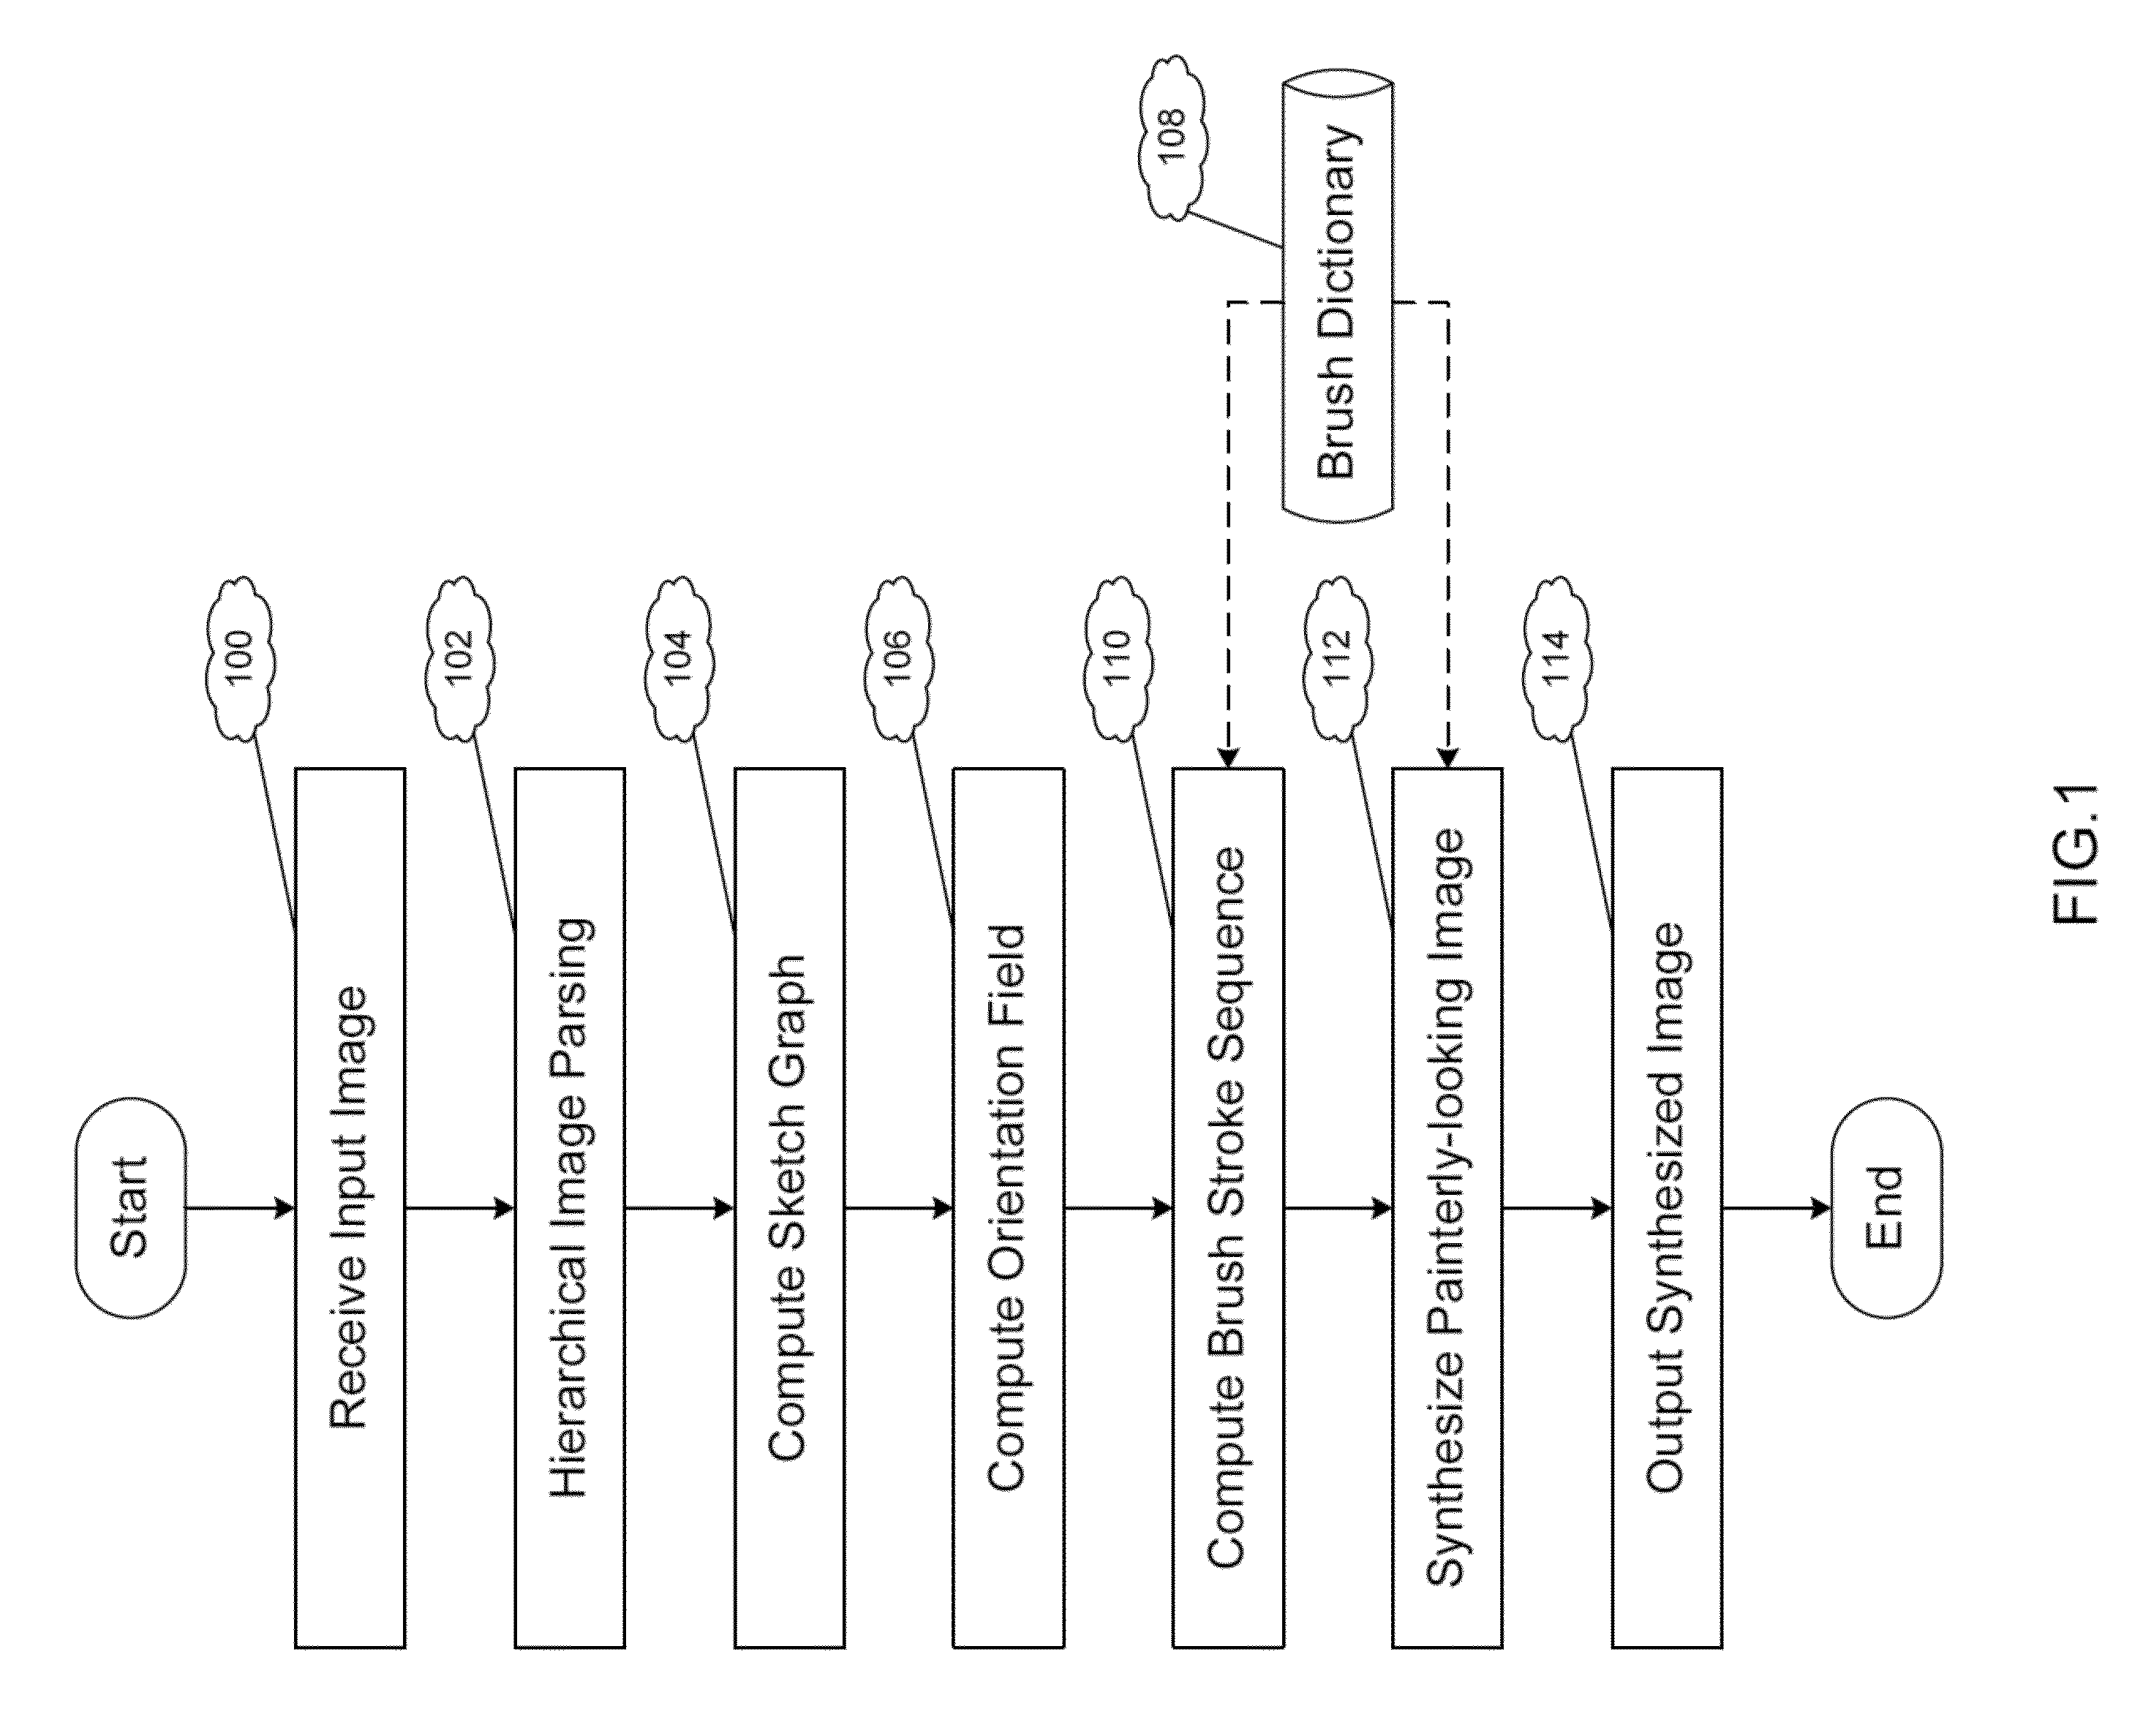 System and method for painterly rendering based on image parsing